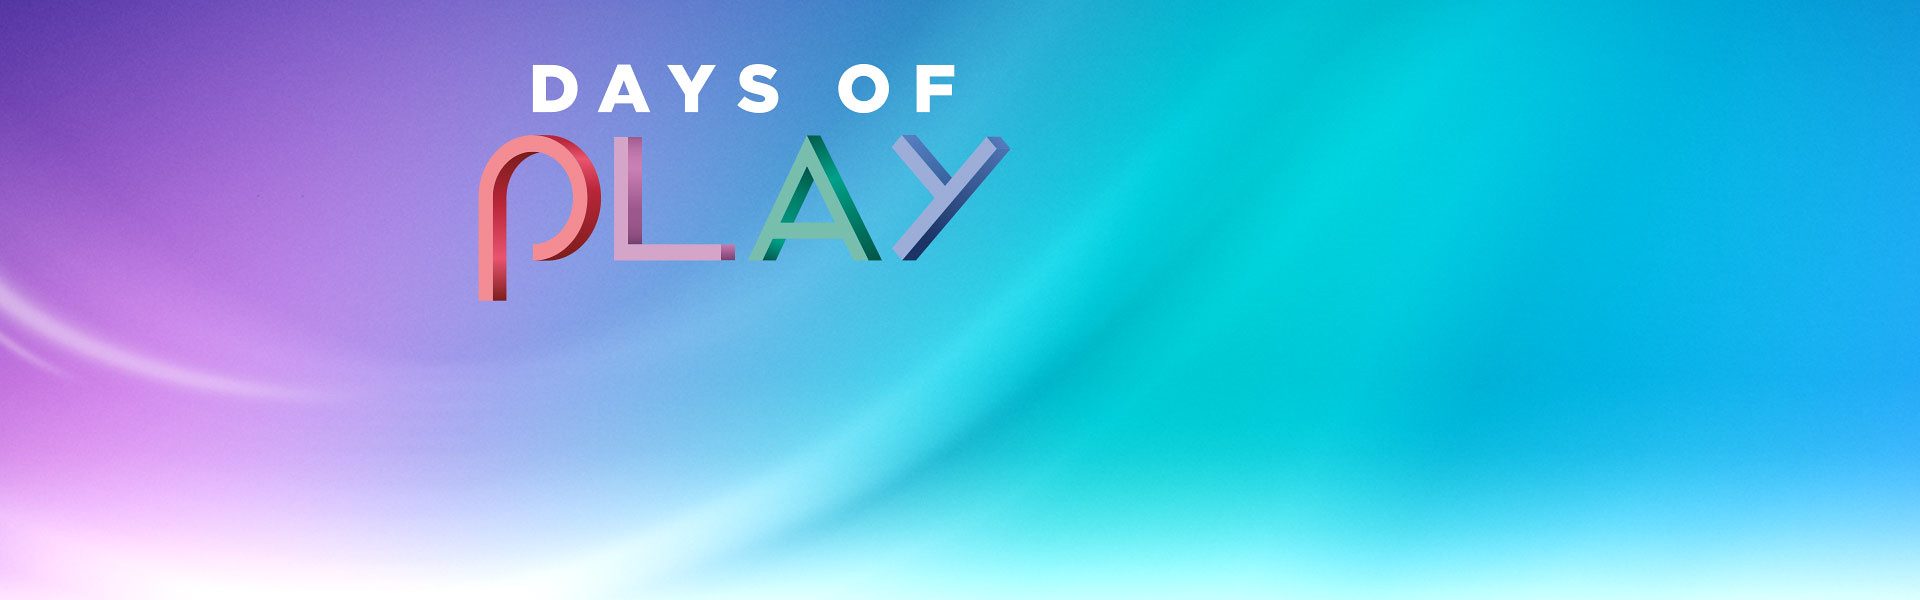 playstation days of play 2020